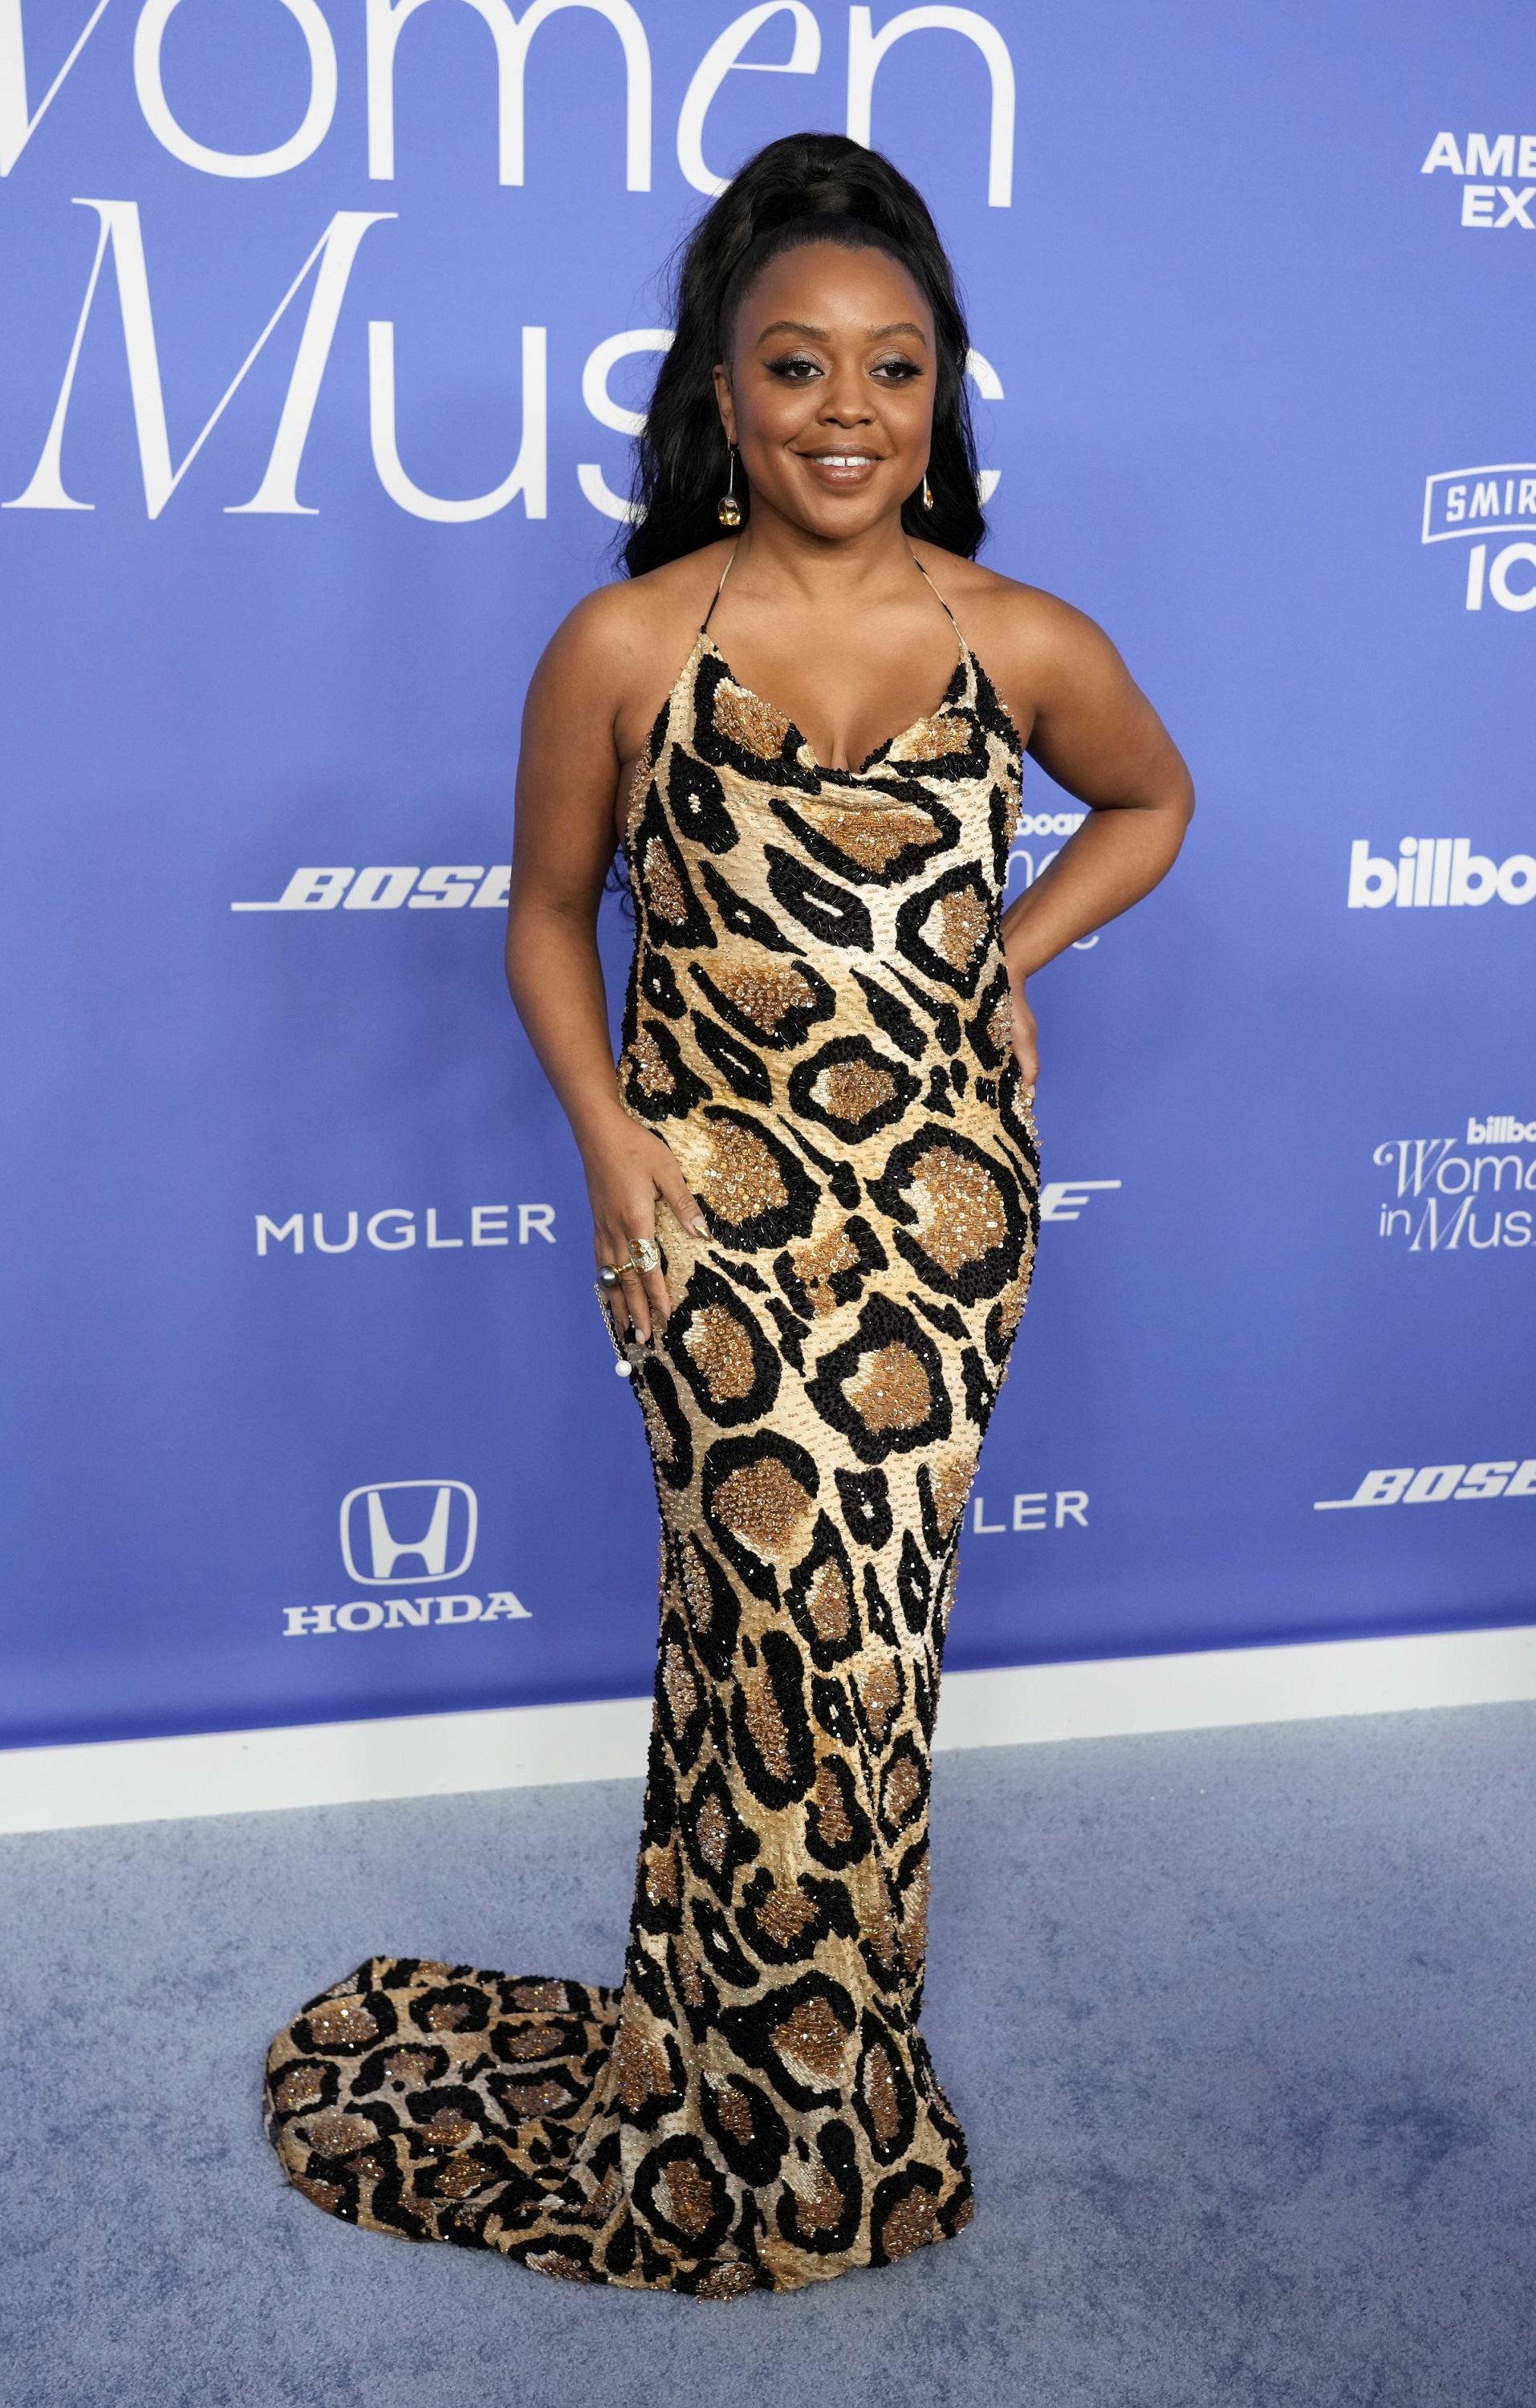 Quinta Brunson wearing a strappy sequined floor-length leopard print gown with a high pony tail